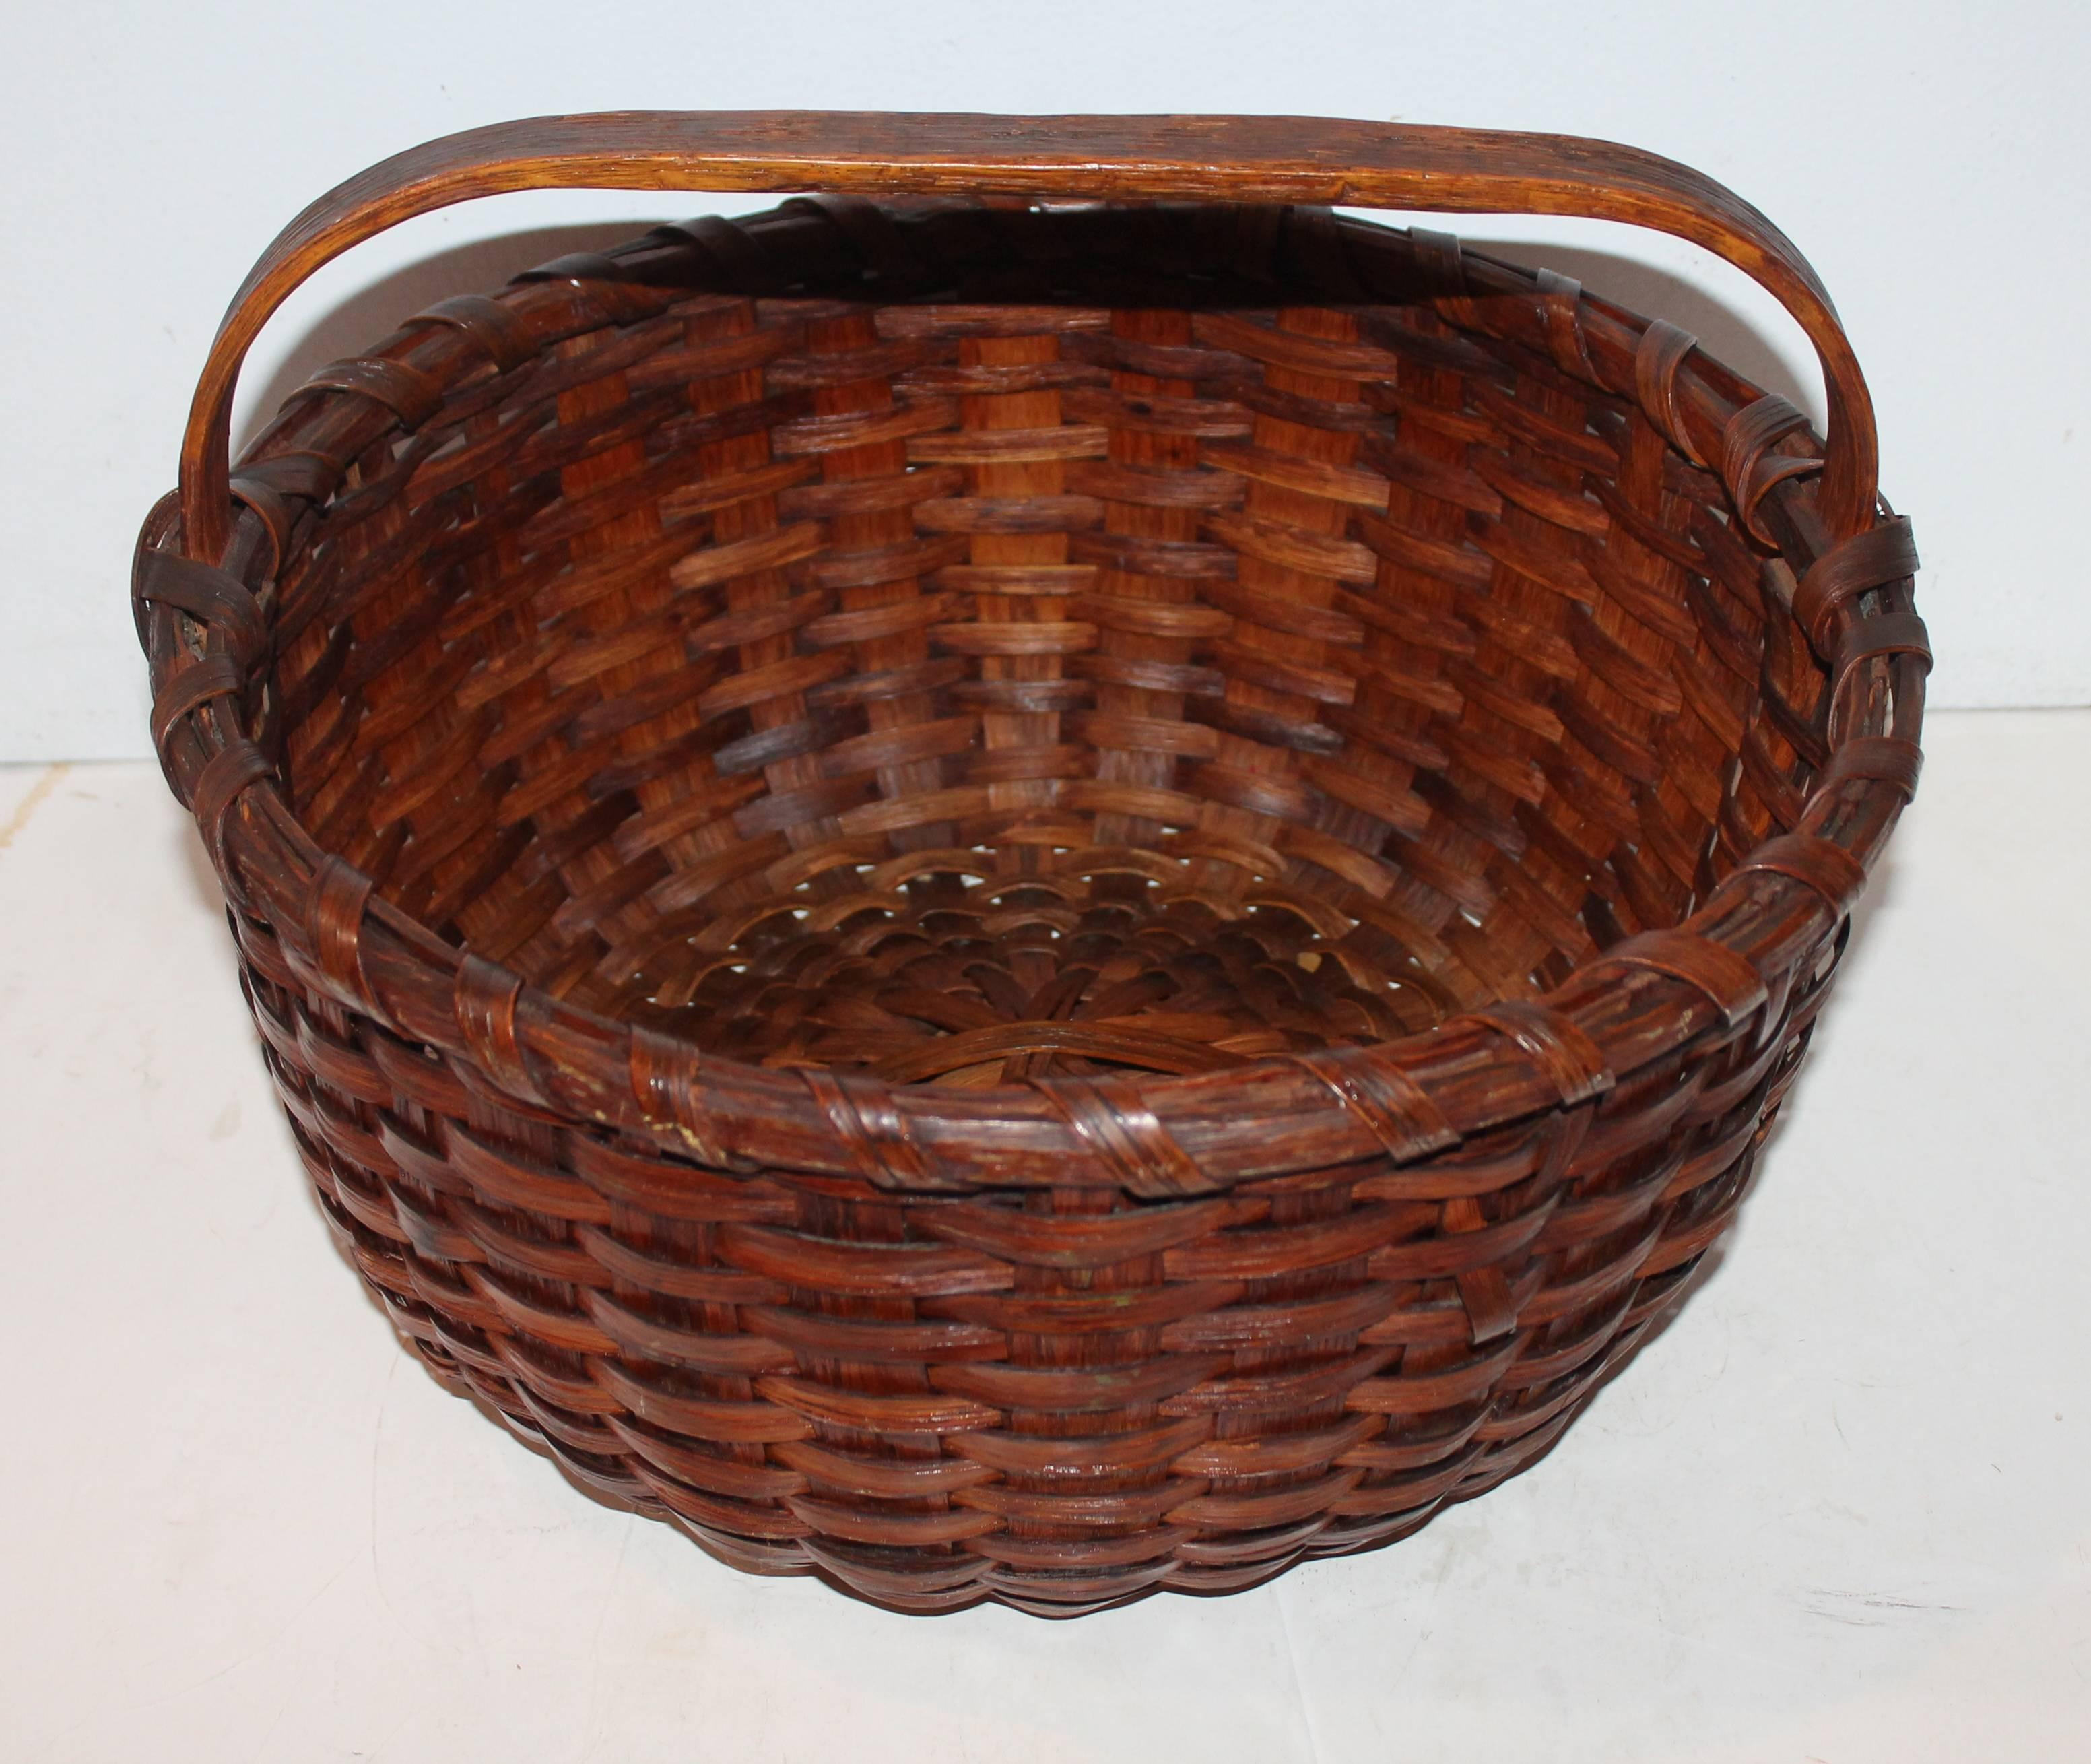 Large 19th century round fruit basket from Pennsylvania. This double wrap basket is in very good condition. Theses baskets are very hard to find in great condition.